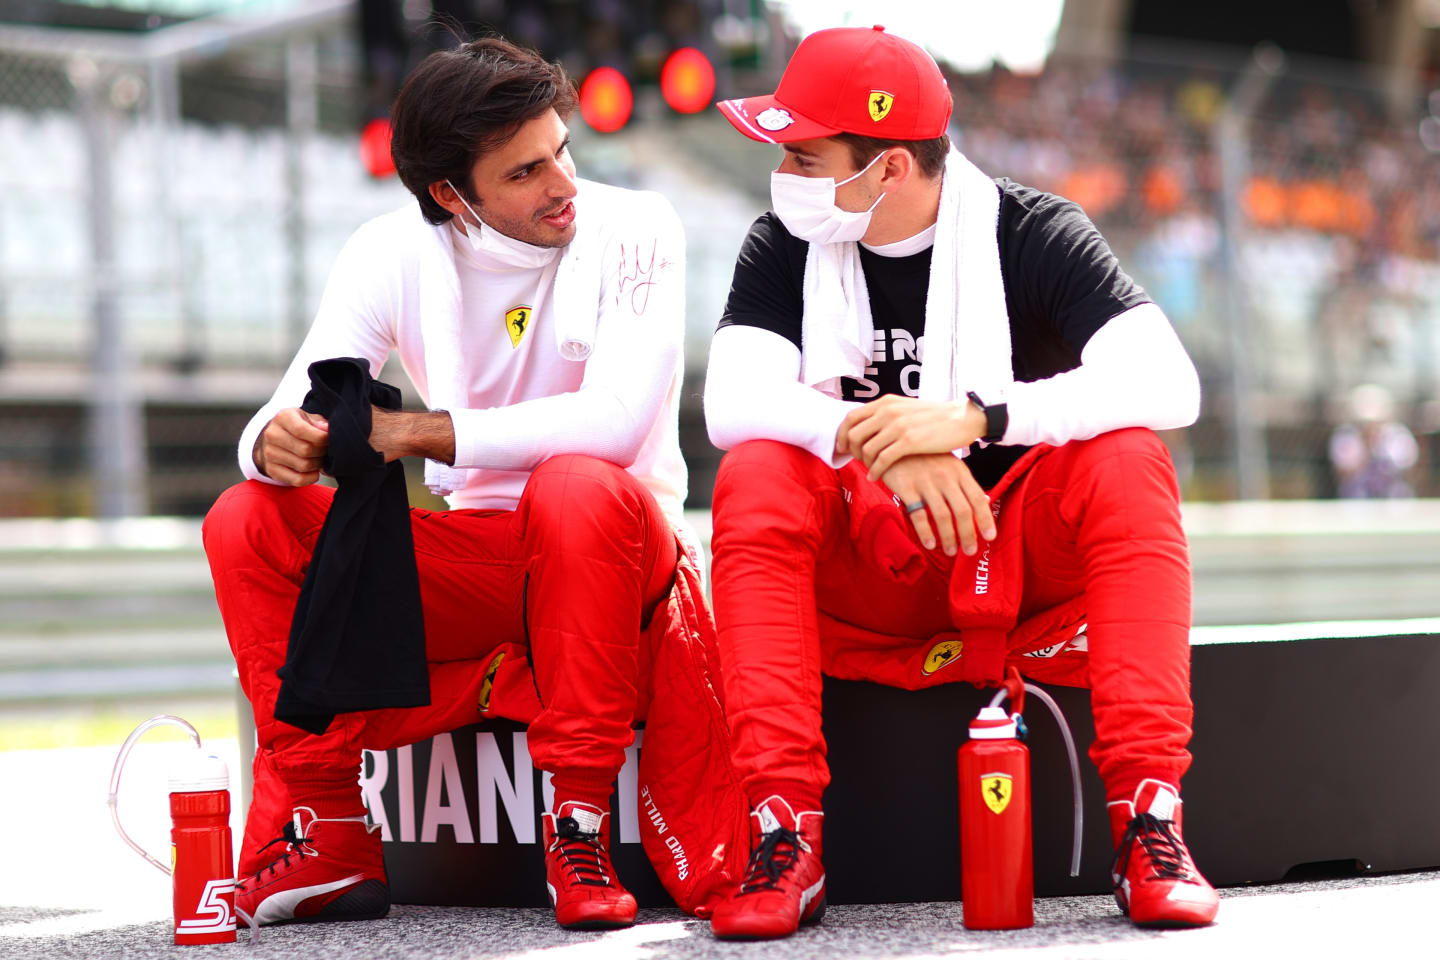 SPIELBERG, AUSTRIA - JUNE 27: Carlos Sainz of Spain and Ferrari and Charles Leclerc of Monaco and Ferrari talk on the grid ahead of the F1 Grand Prix of Styria at Red Bull Ring on June 27, 2021 in Spielberg, Austria. (Photo by Dan Istitene - Formula 1/Formula 1 via Getty Images)